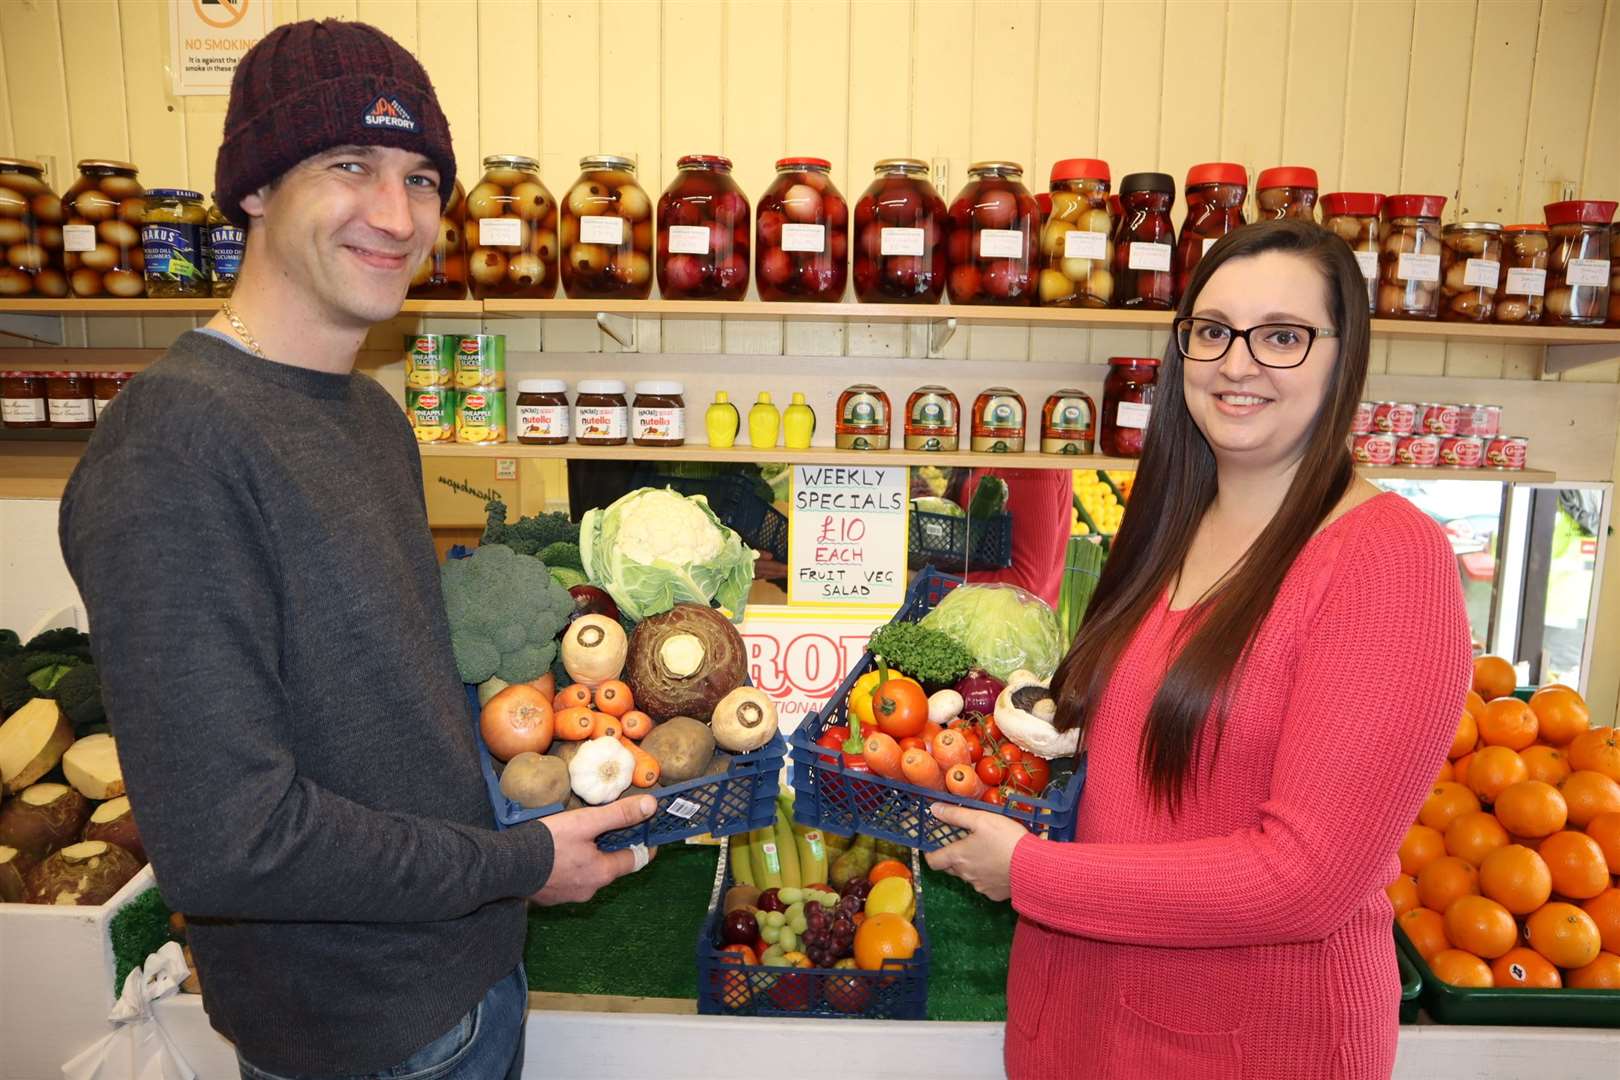 Lewis and Stacey Feaver of Rob's Traditional Greengrocery in Sheerness are fighting back in the battle to keep high street businesses alive by introducing £10 vegetable, salad and fruit packs